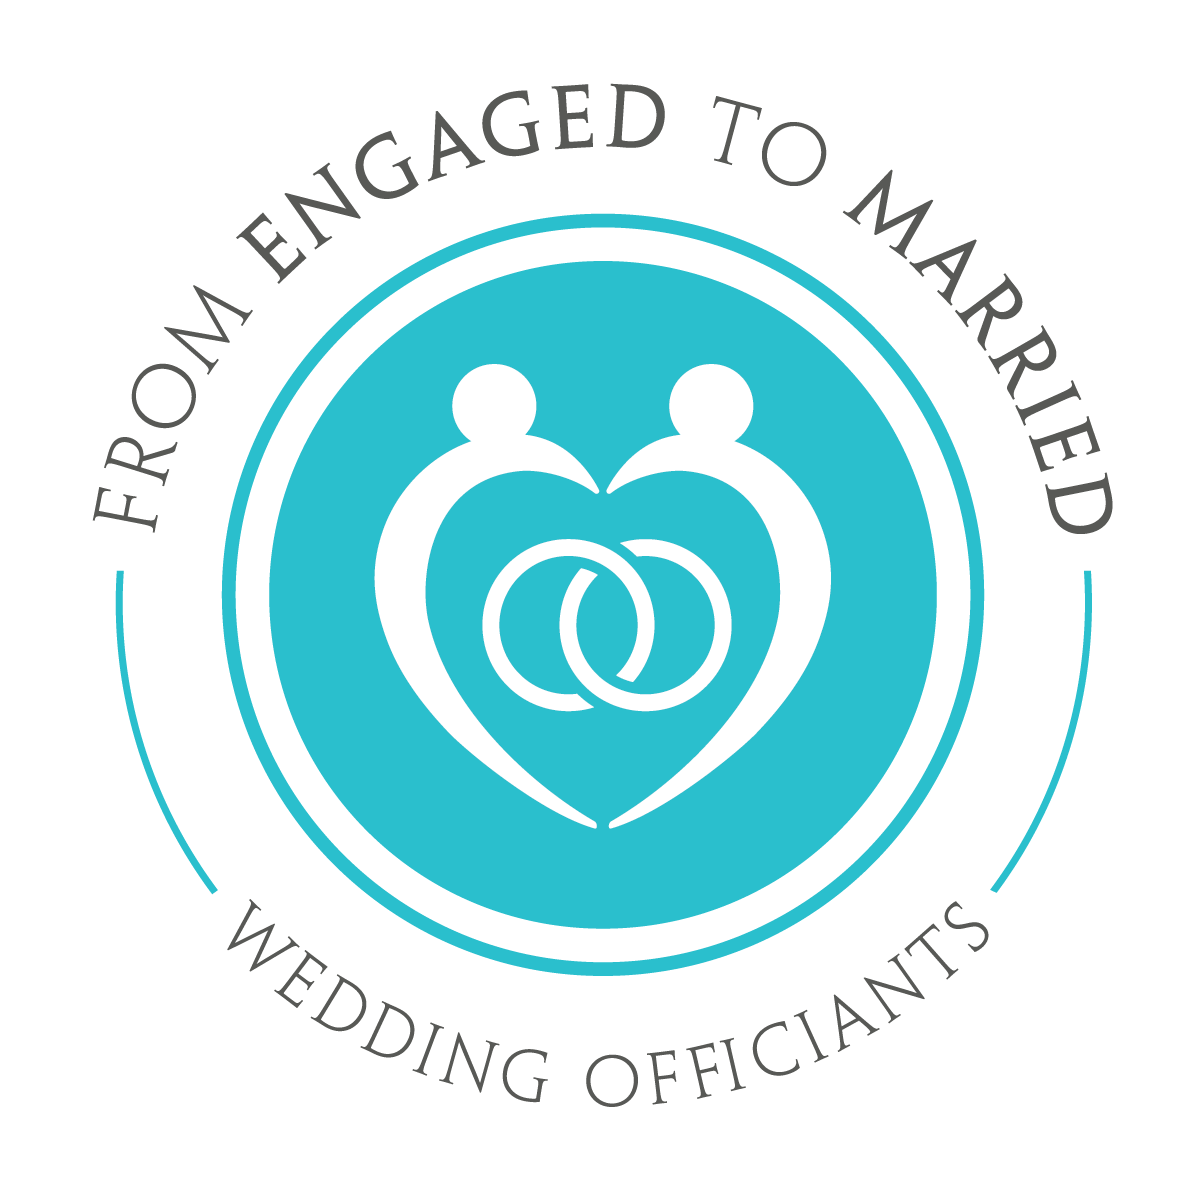 From Engaged To Married, Wedding Officiant Services 